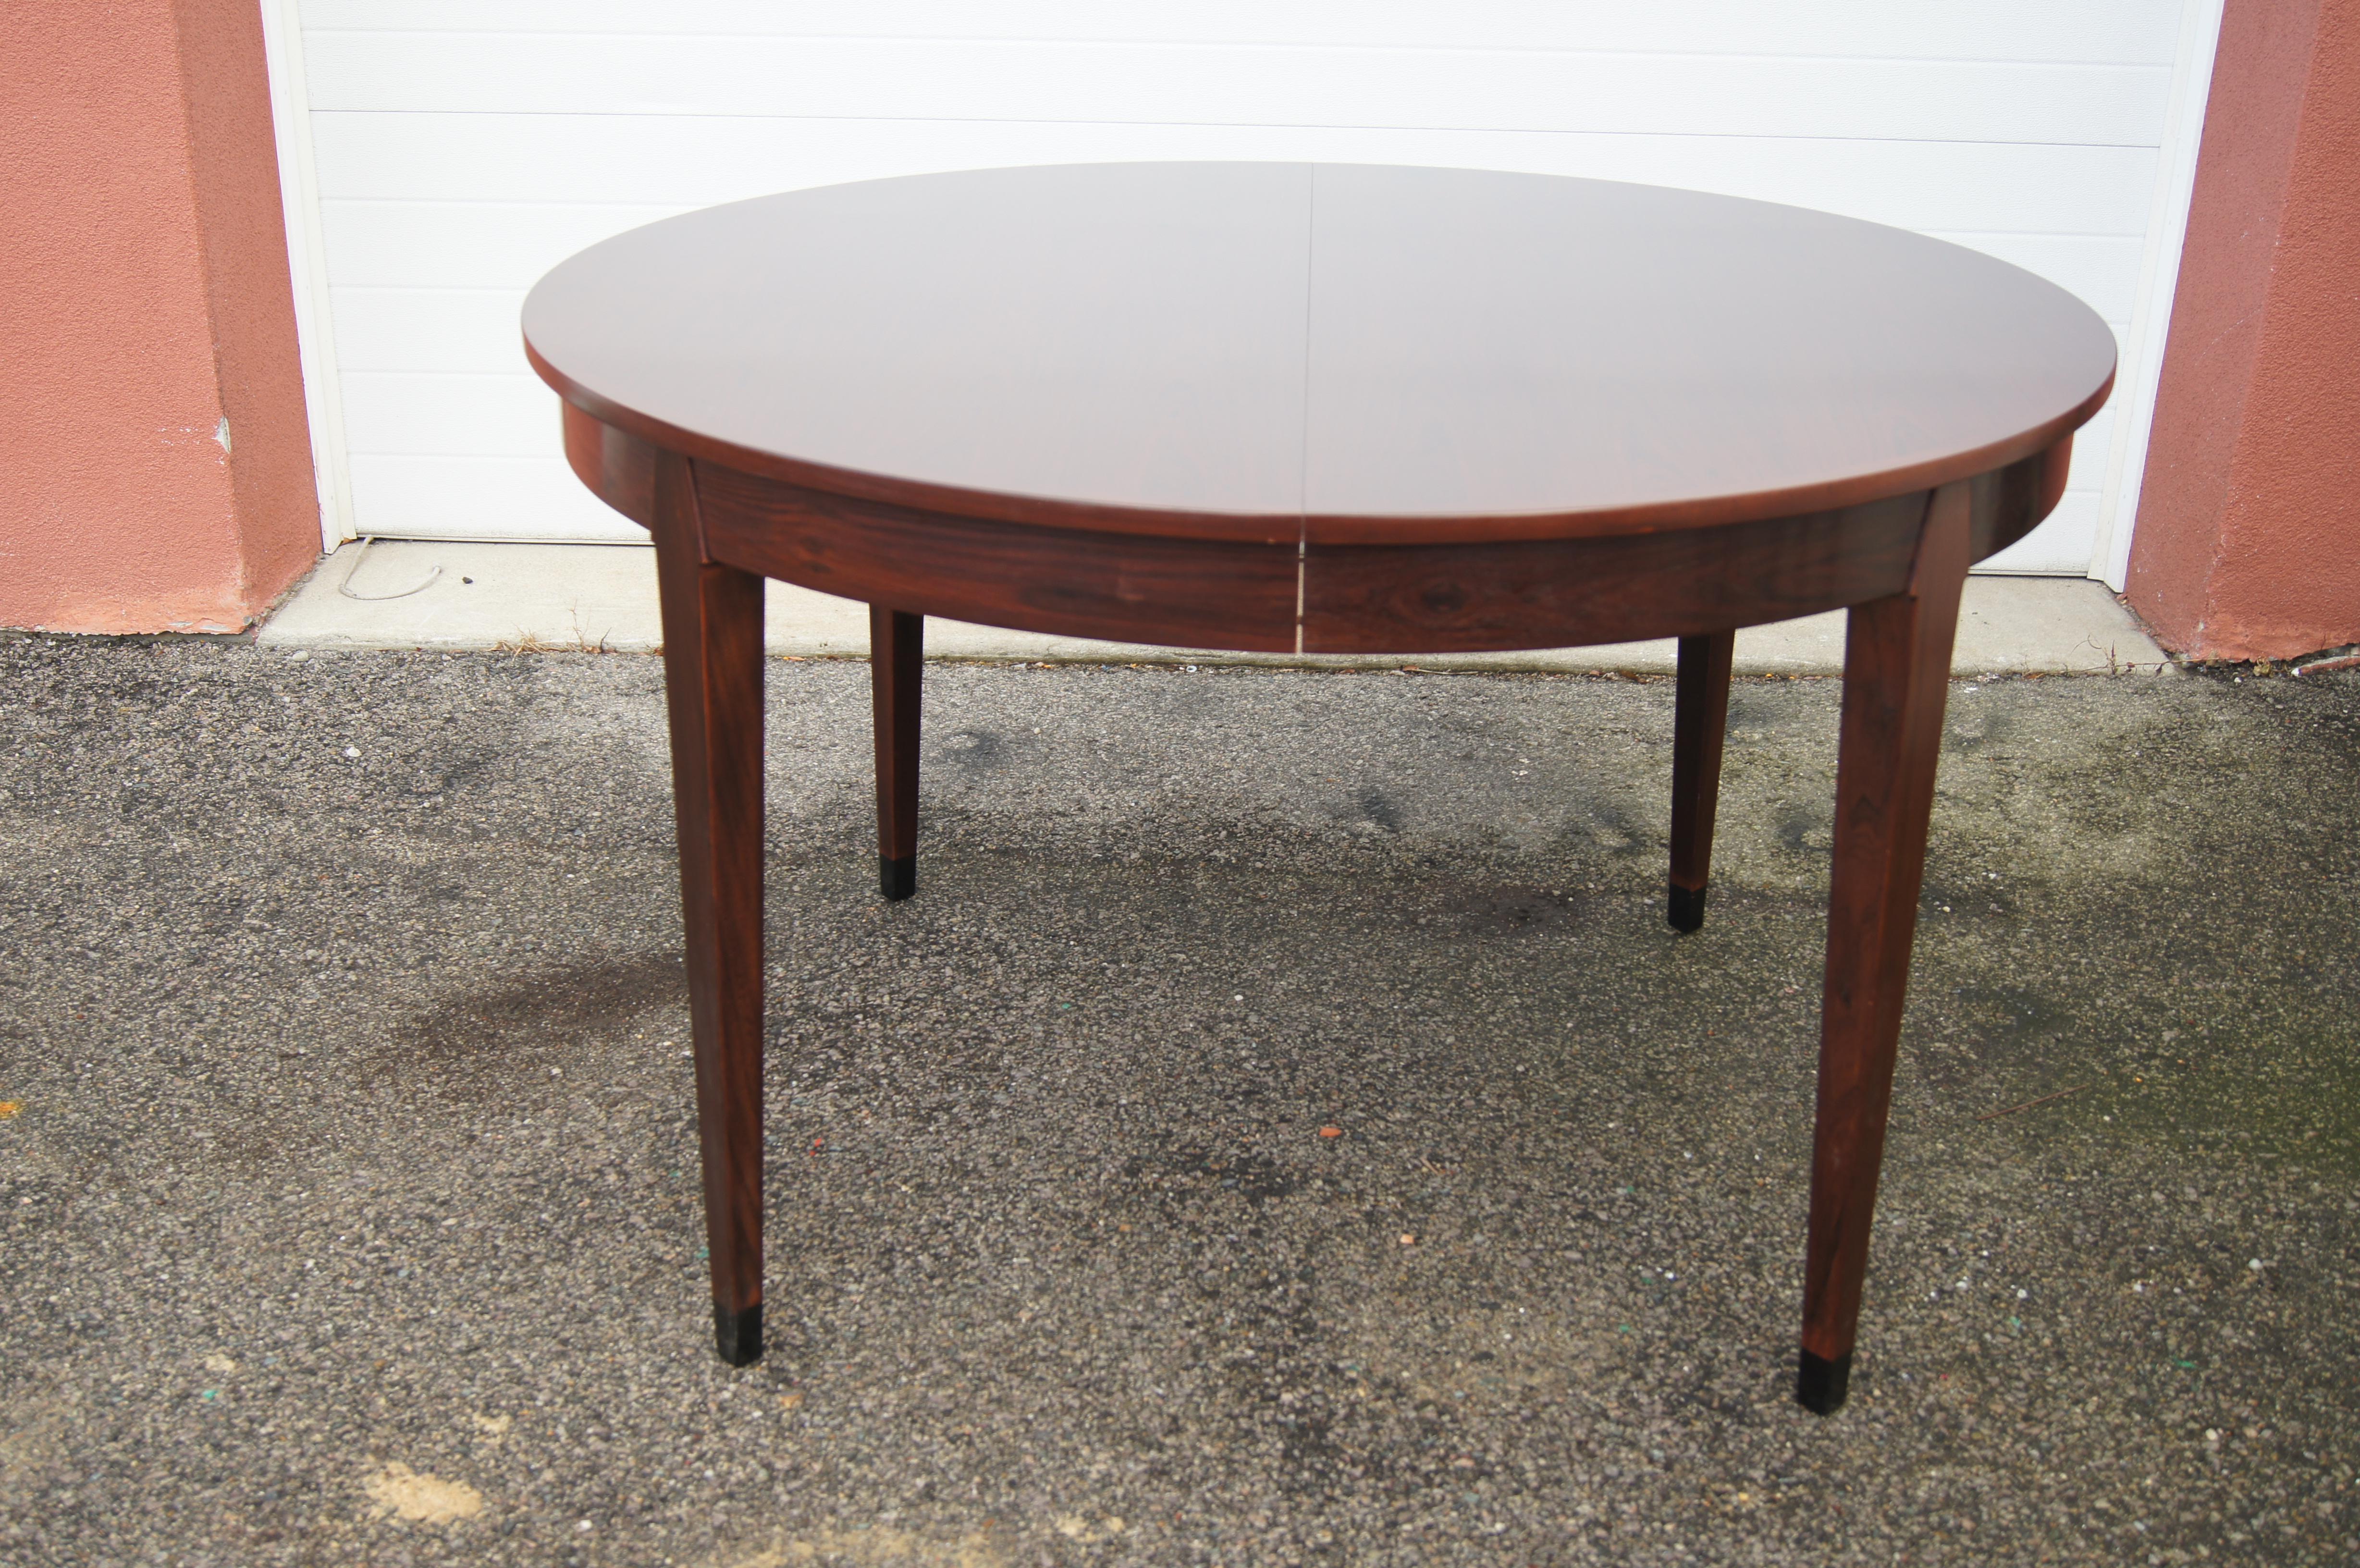 Danish modernist Arne Vodder designed this round rosewood dining table with tapered legs in the 1960s. It extends to a wider 68.75